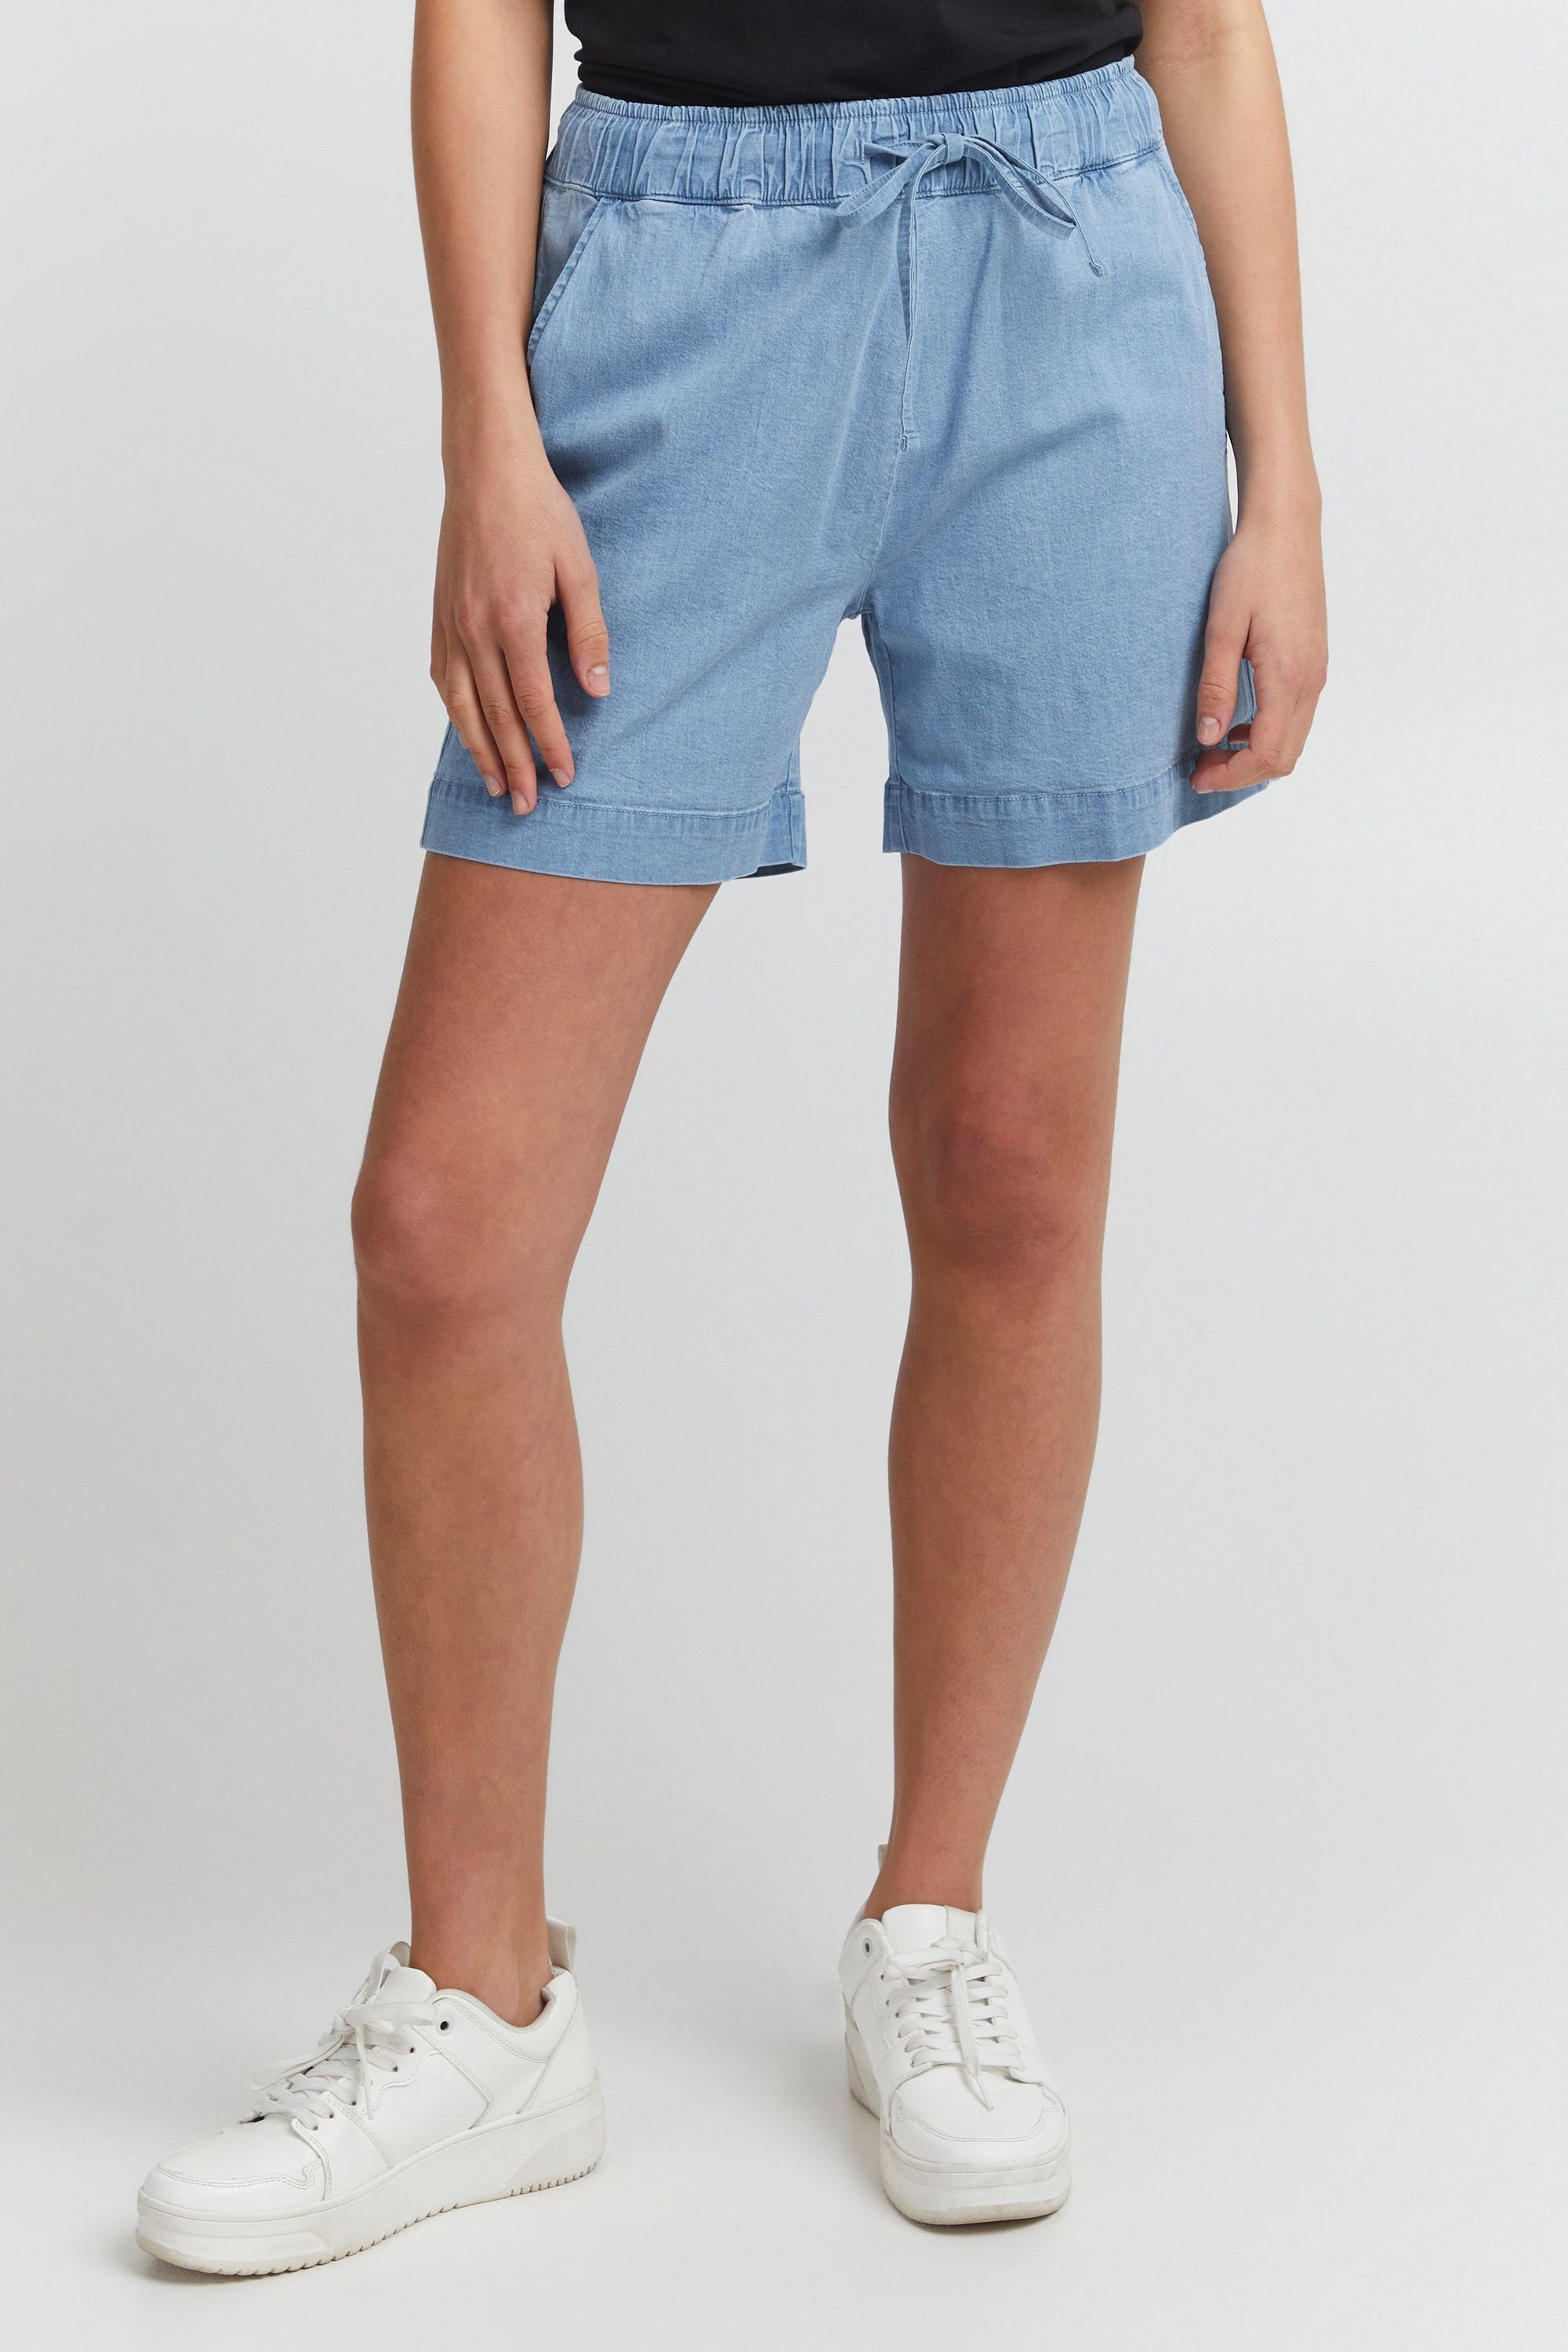 OXMO Jeansshorts Lillith